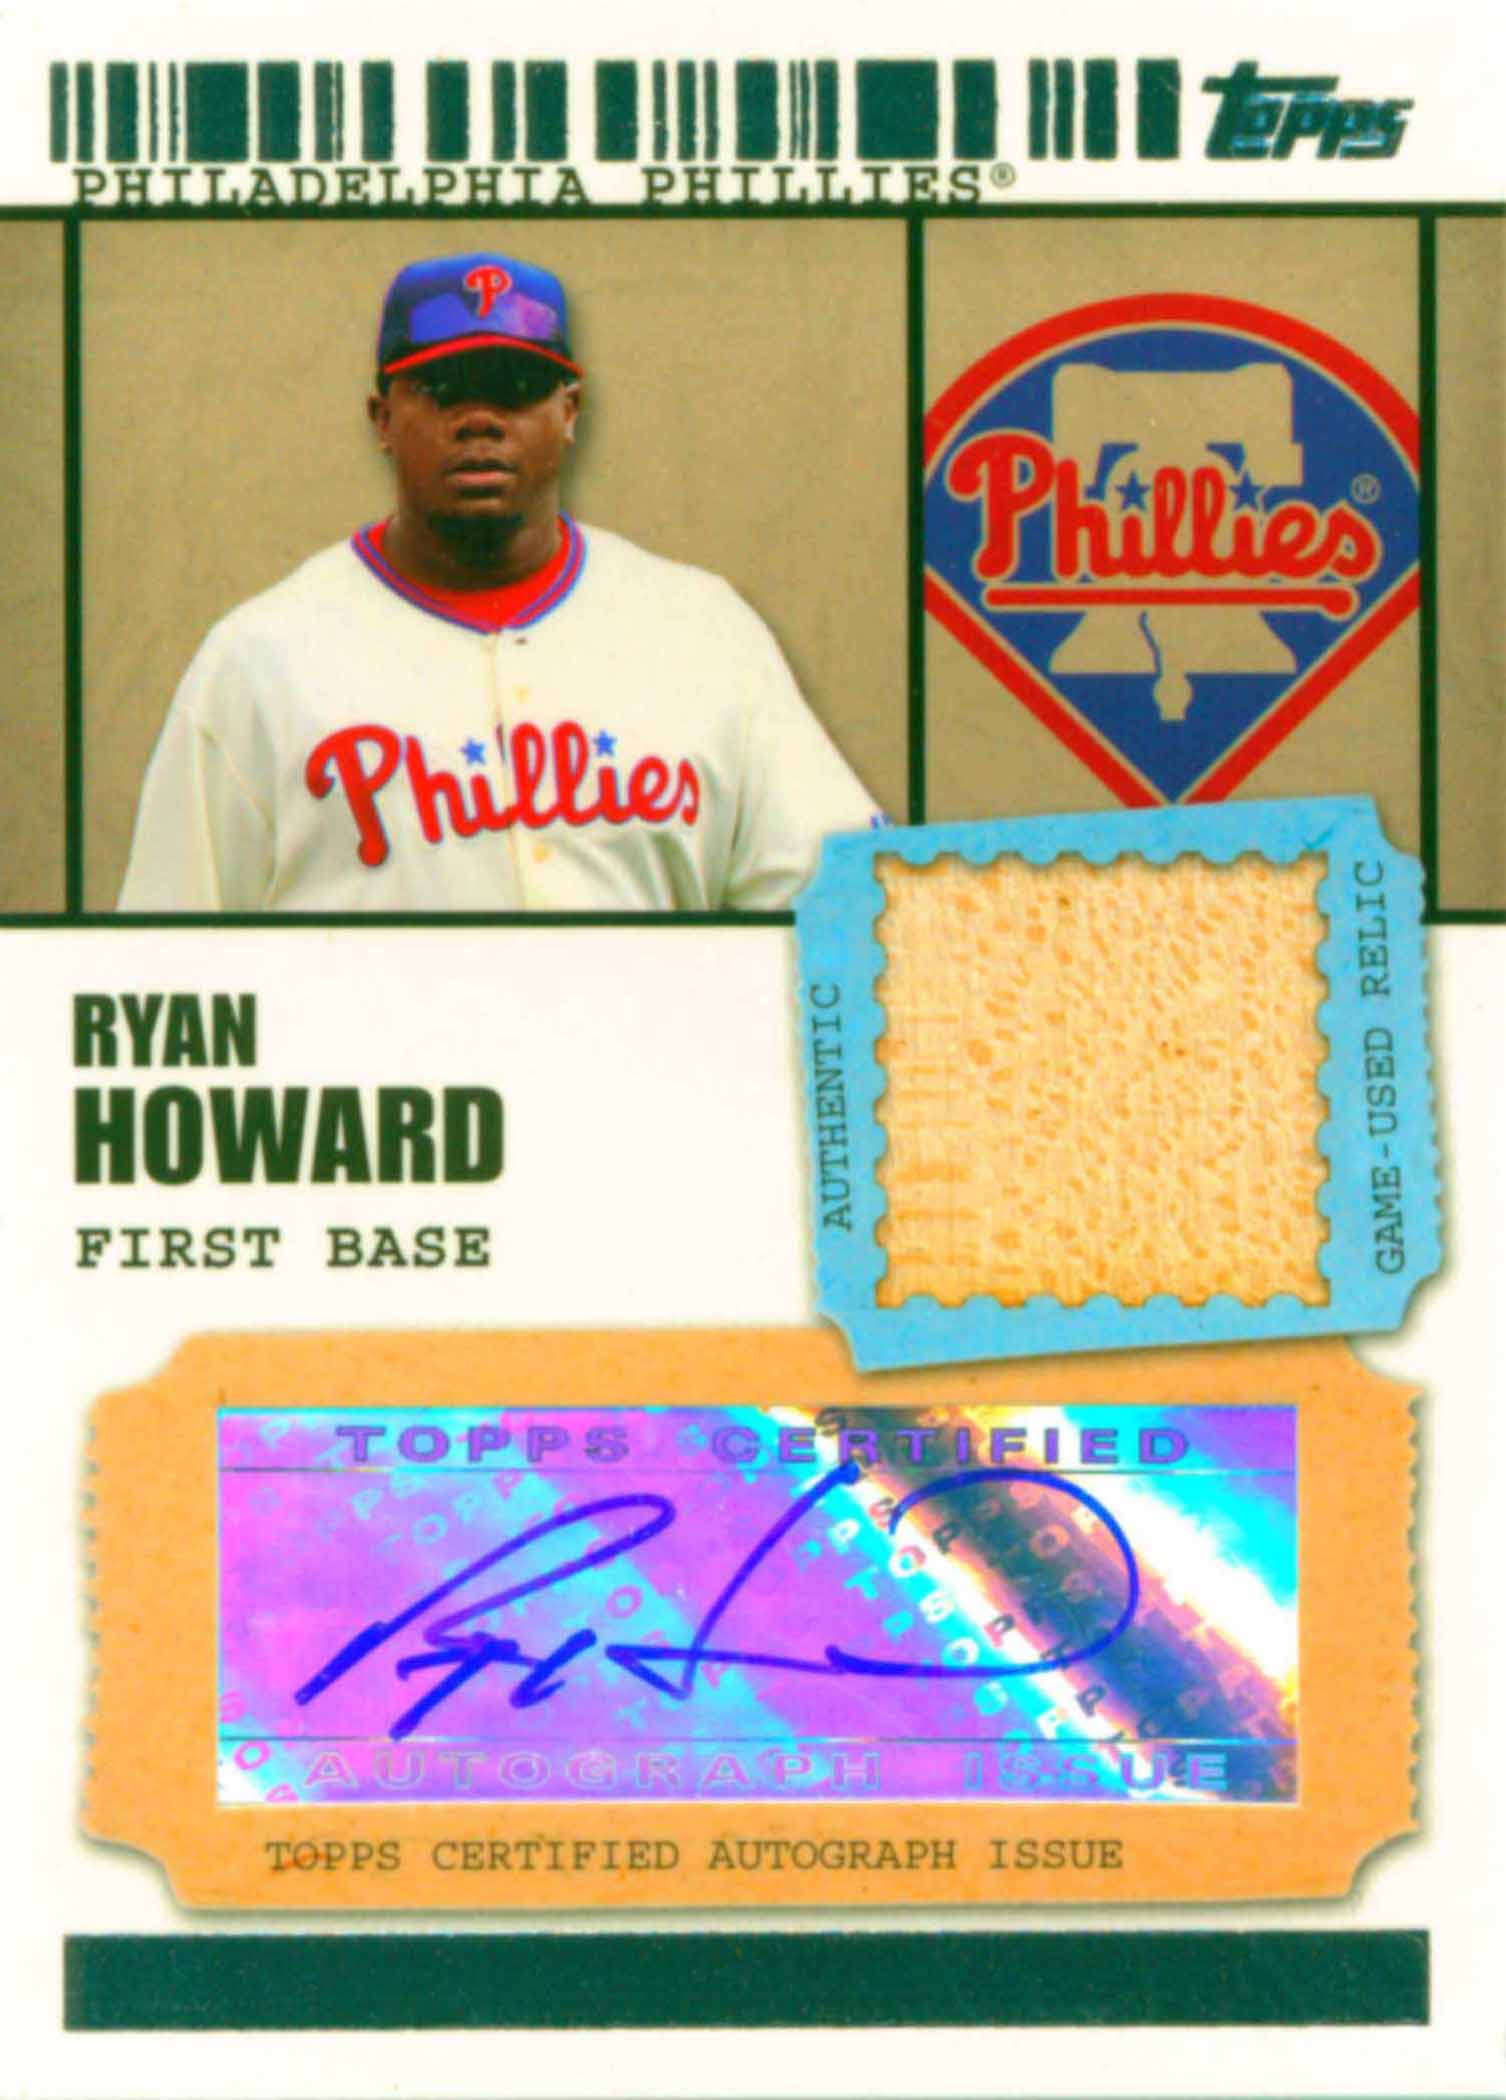 2009 Topps Ticket to Stardom Autograph Relics Bat